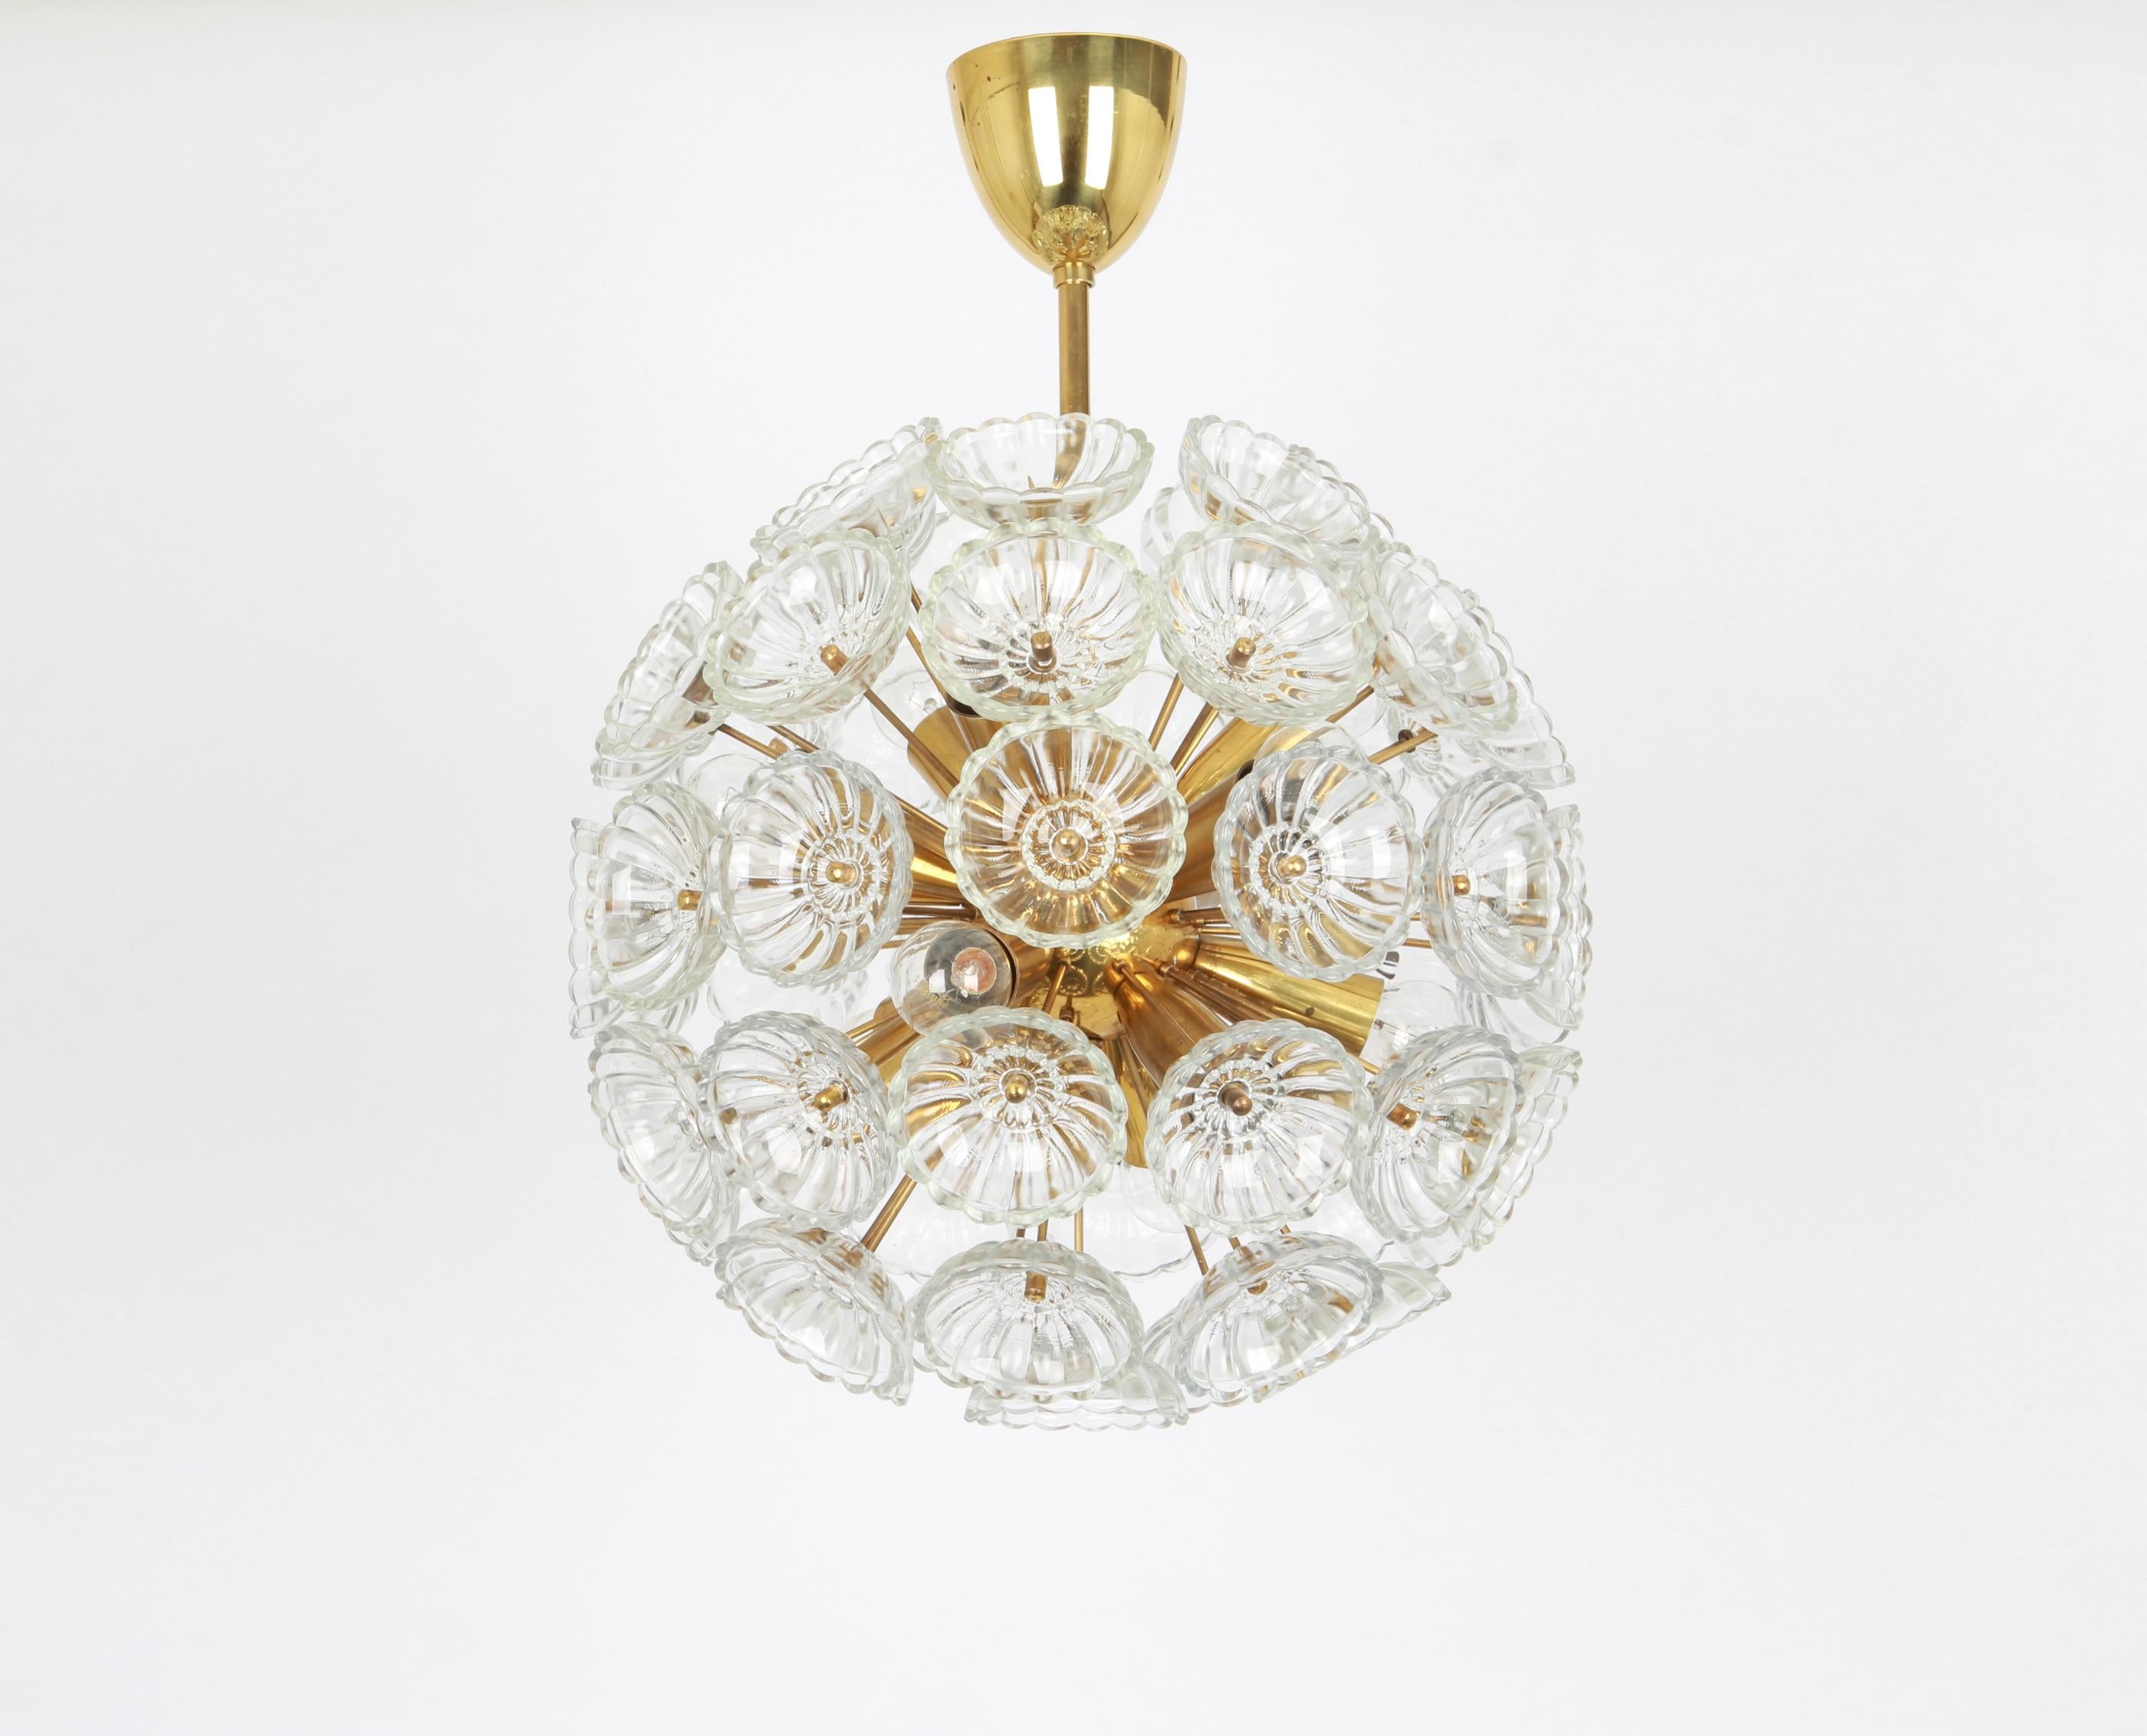 1 of 2 Stunning Floral Glass and Brass Sputnik Chandeliers, Germany, 1960s For Sale 5